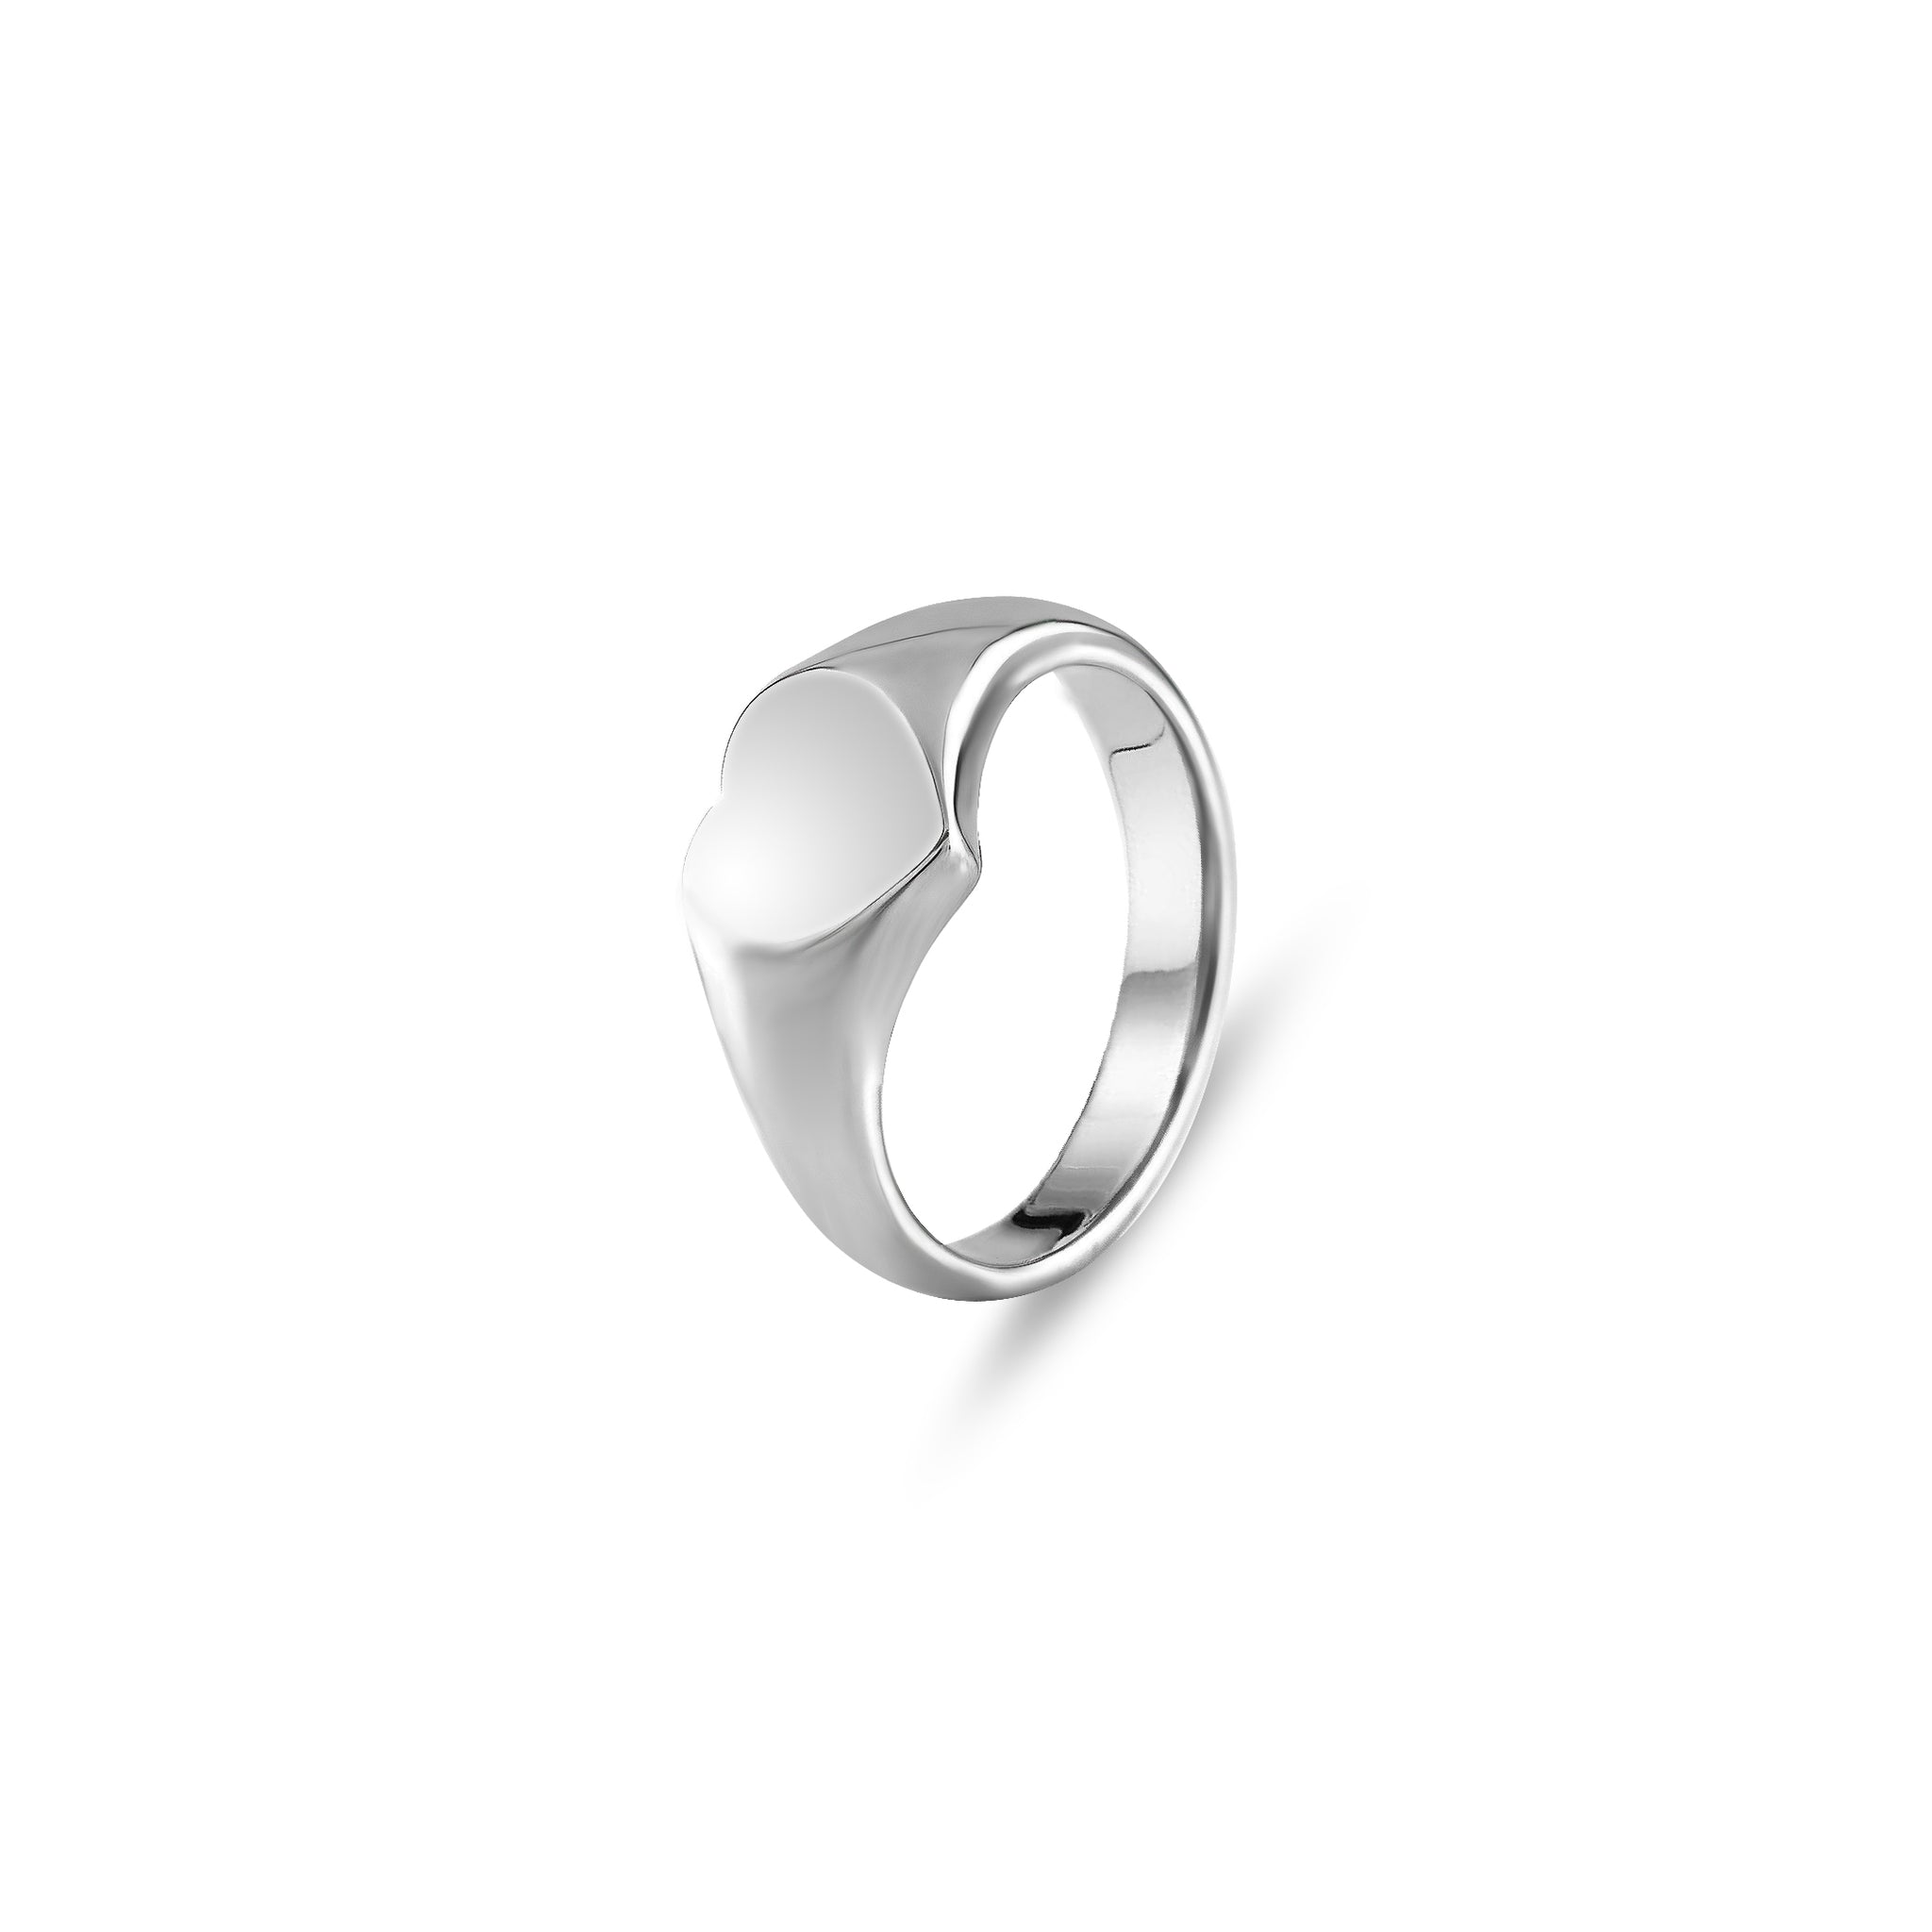 Silver 9 x 9mm Heart Signet Ring